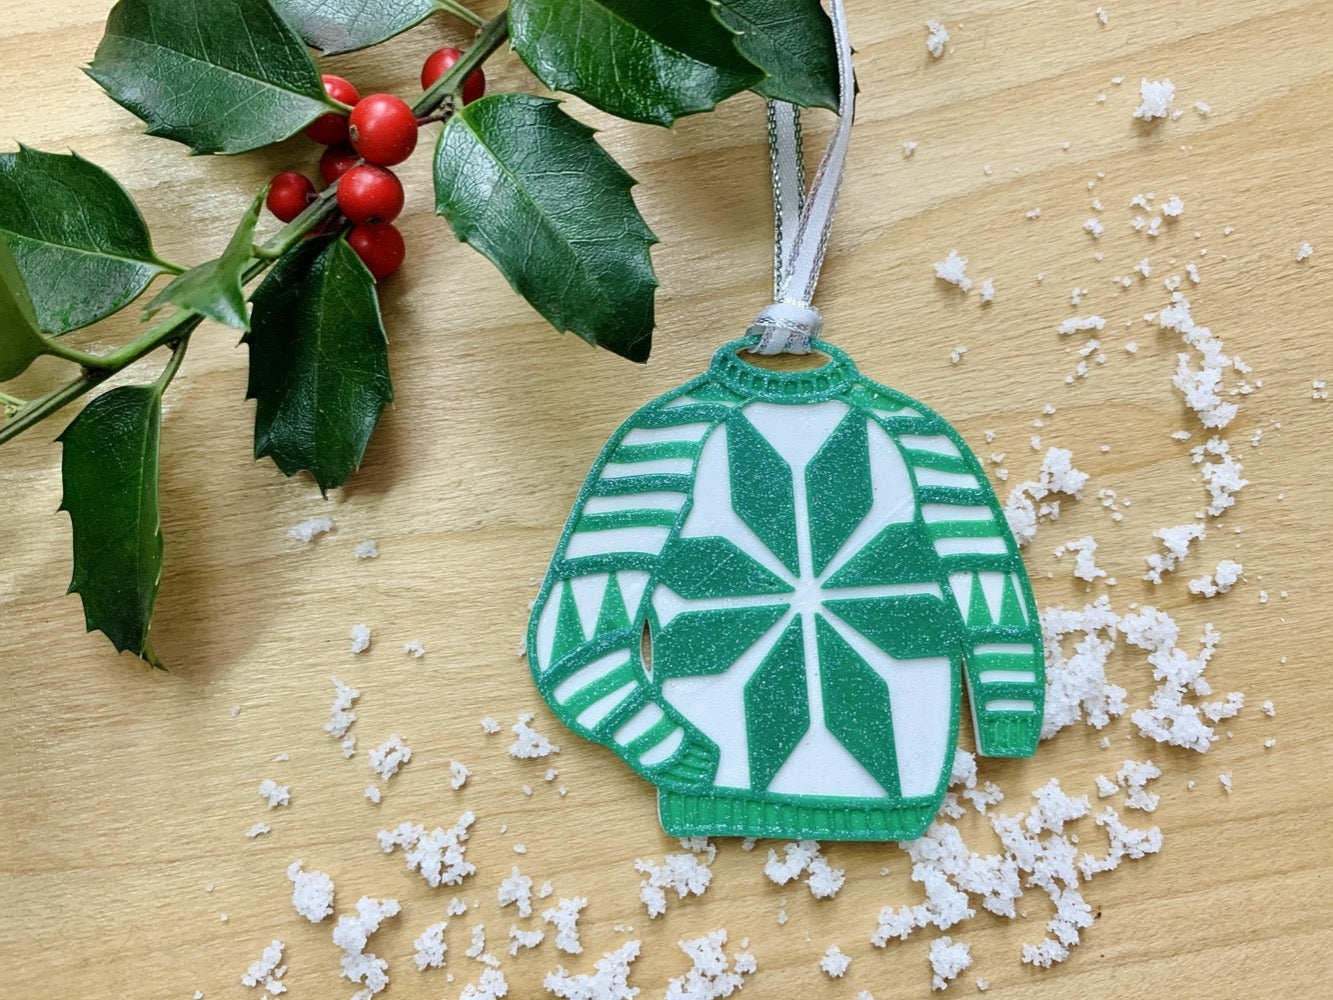 Shown on a wood shelf is a sprig of holly and some white snow. Laying across this is a 3D printed ornament from R+D. It is in the shape of a chunky sweater. This particular one is white and green and has stripes, trees on the sleeves, and a snowflake in the center.